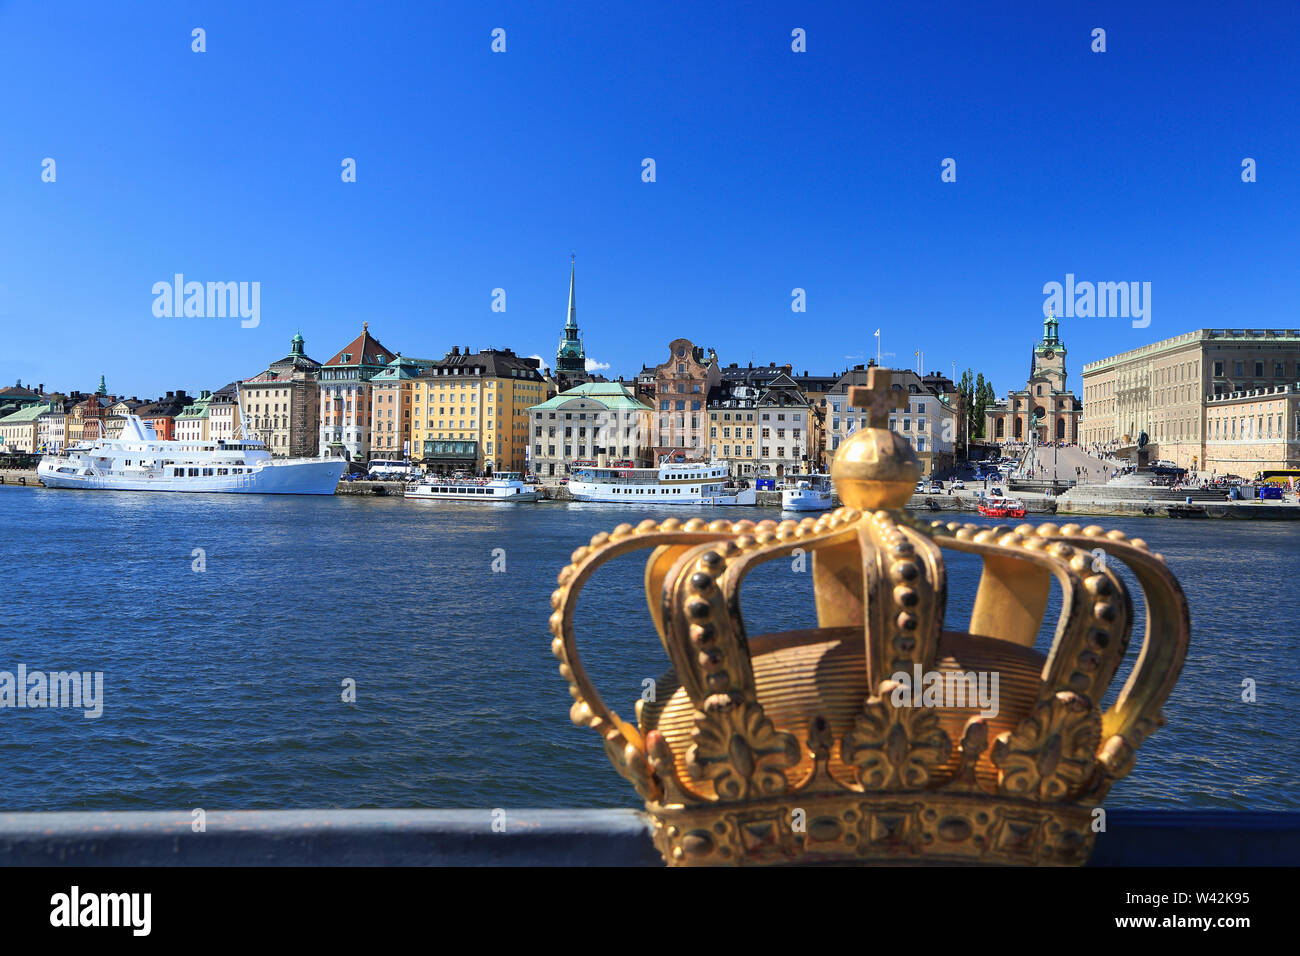 Scenic view of Stockholm's Old Town (Gamla Stan) skyline with the royal golden crown on the foreground, Sweden Stock Photo